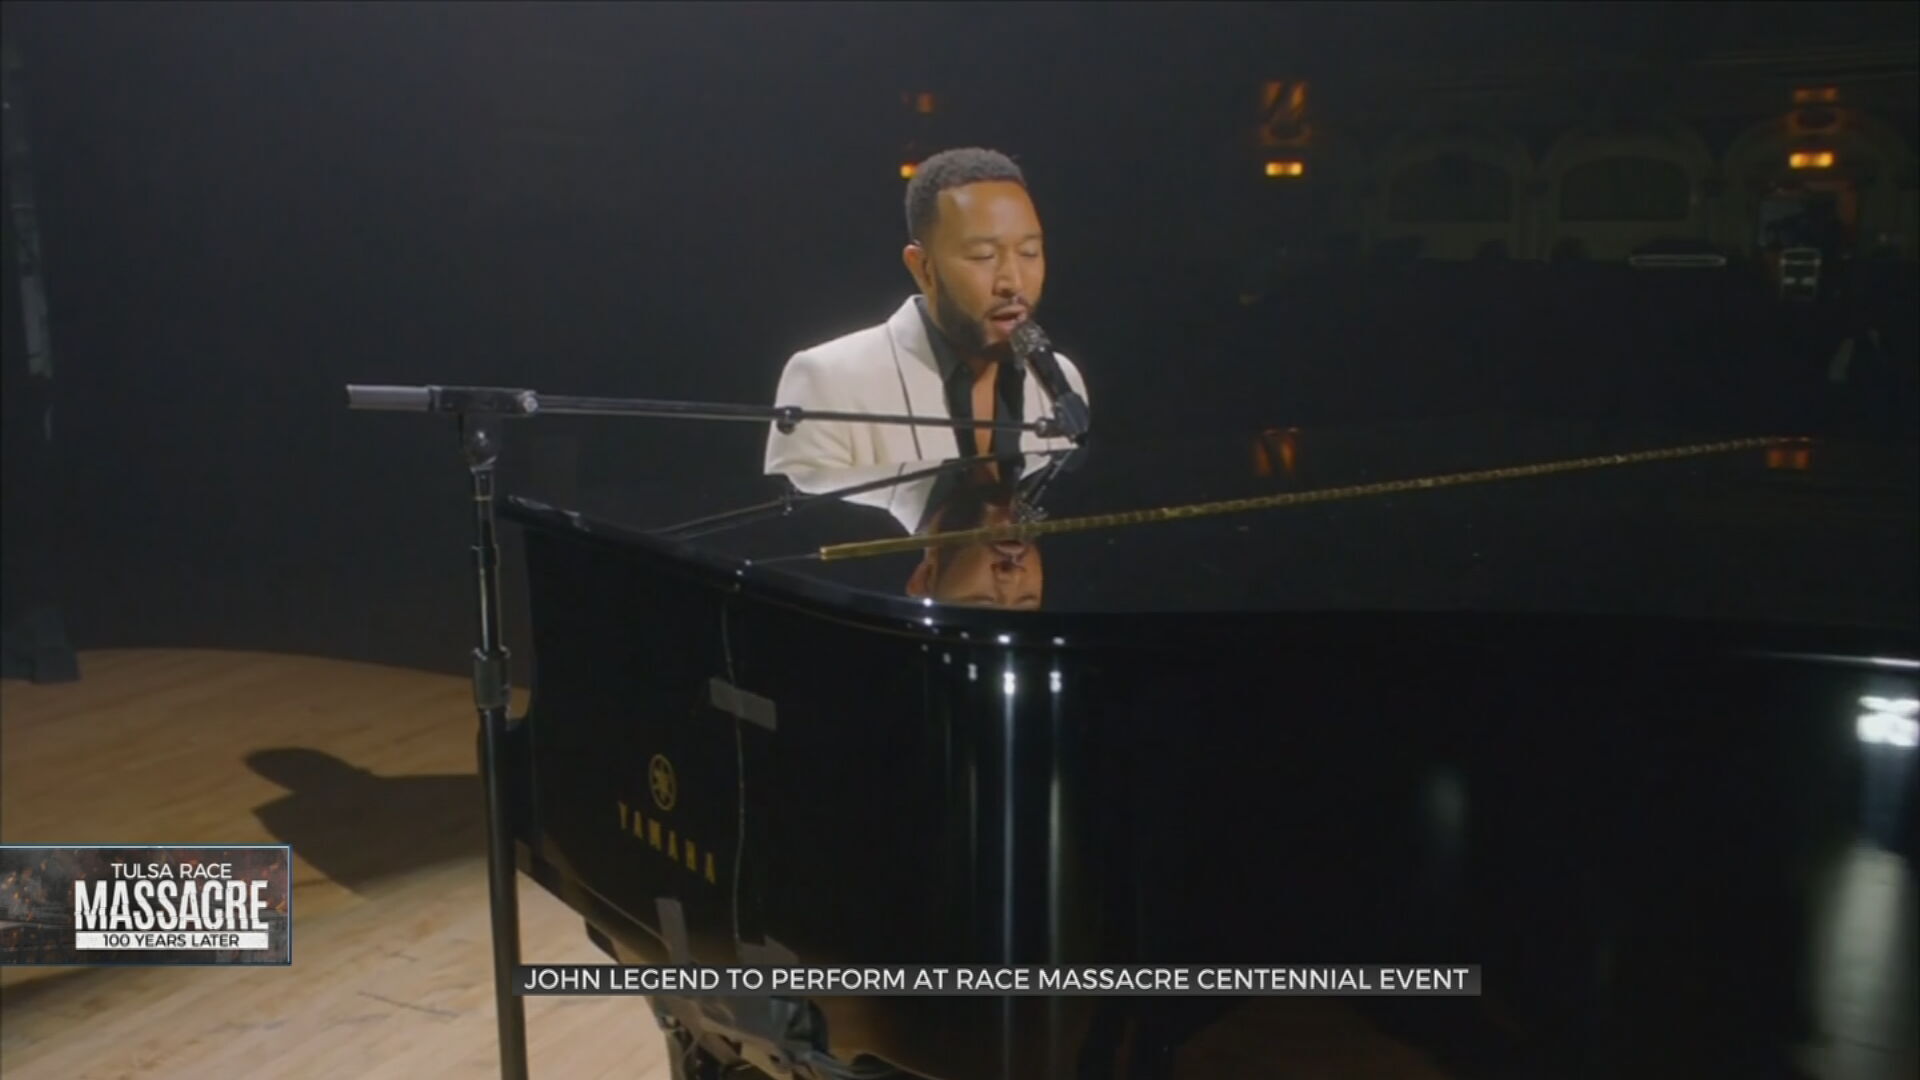 1921 Commission Planning ‘Remember and Rise’ Event Featuring John Legend  